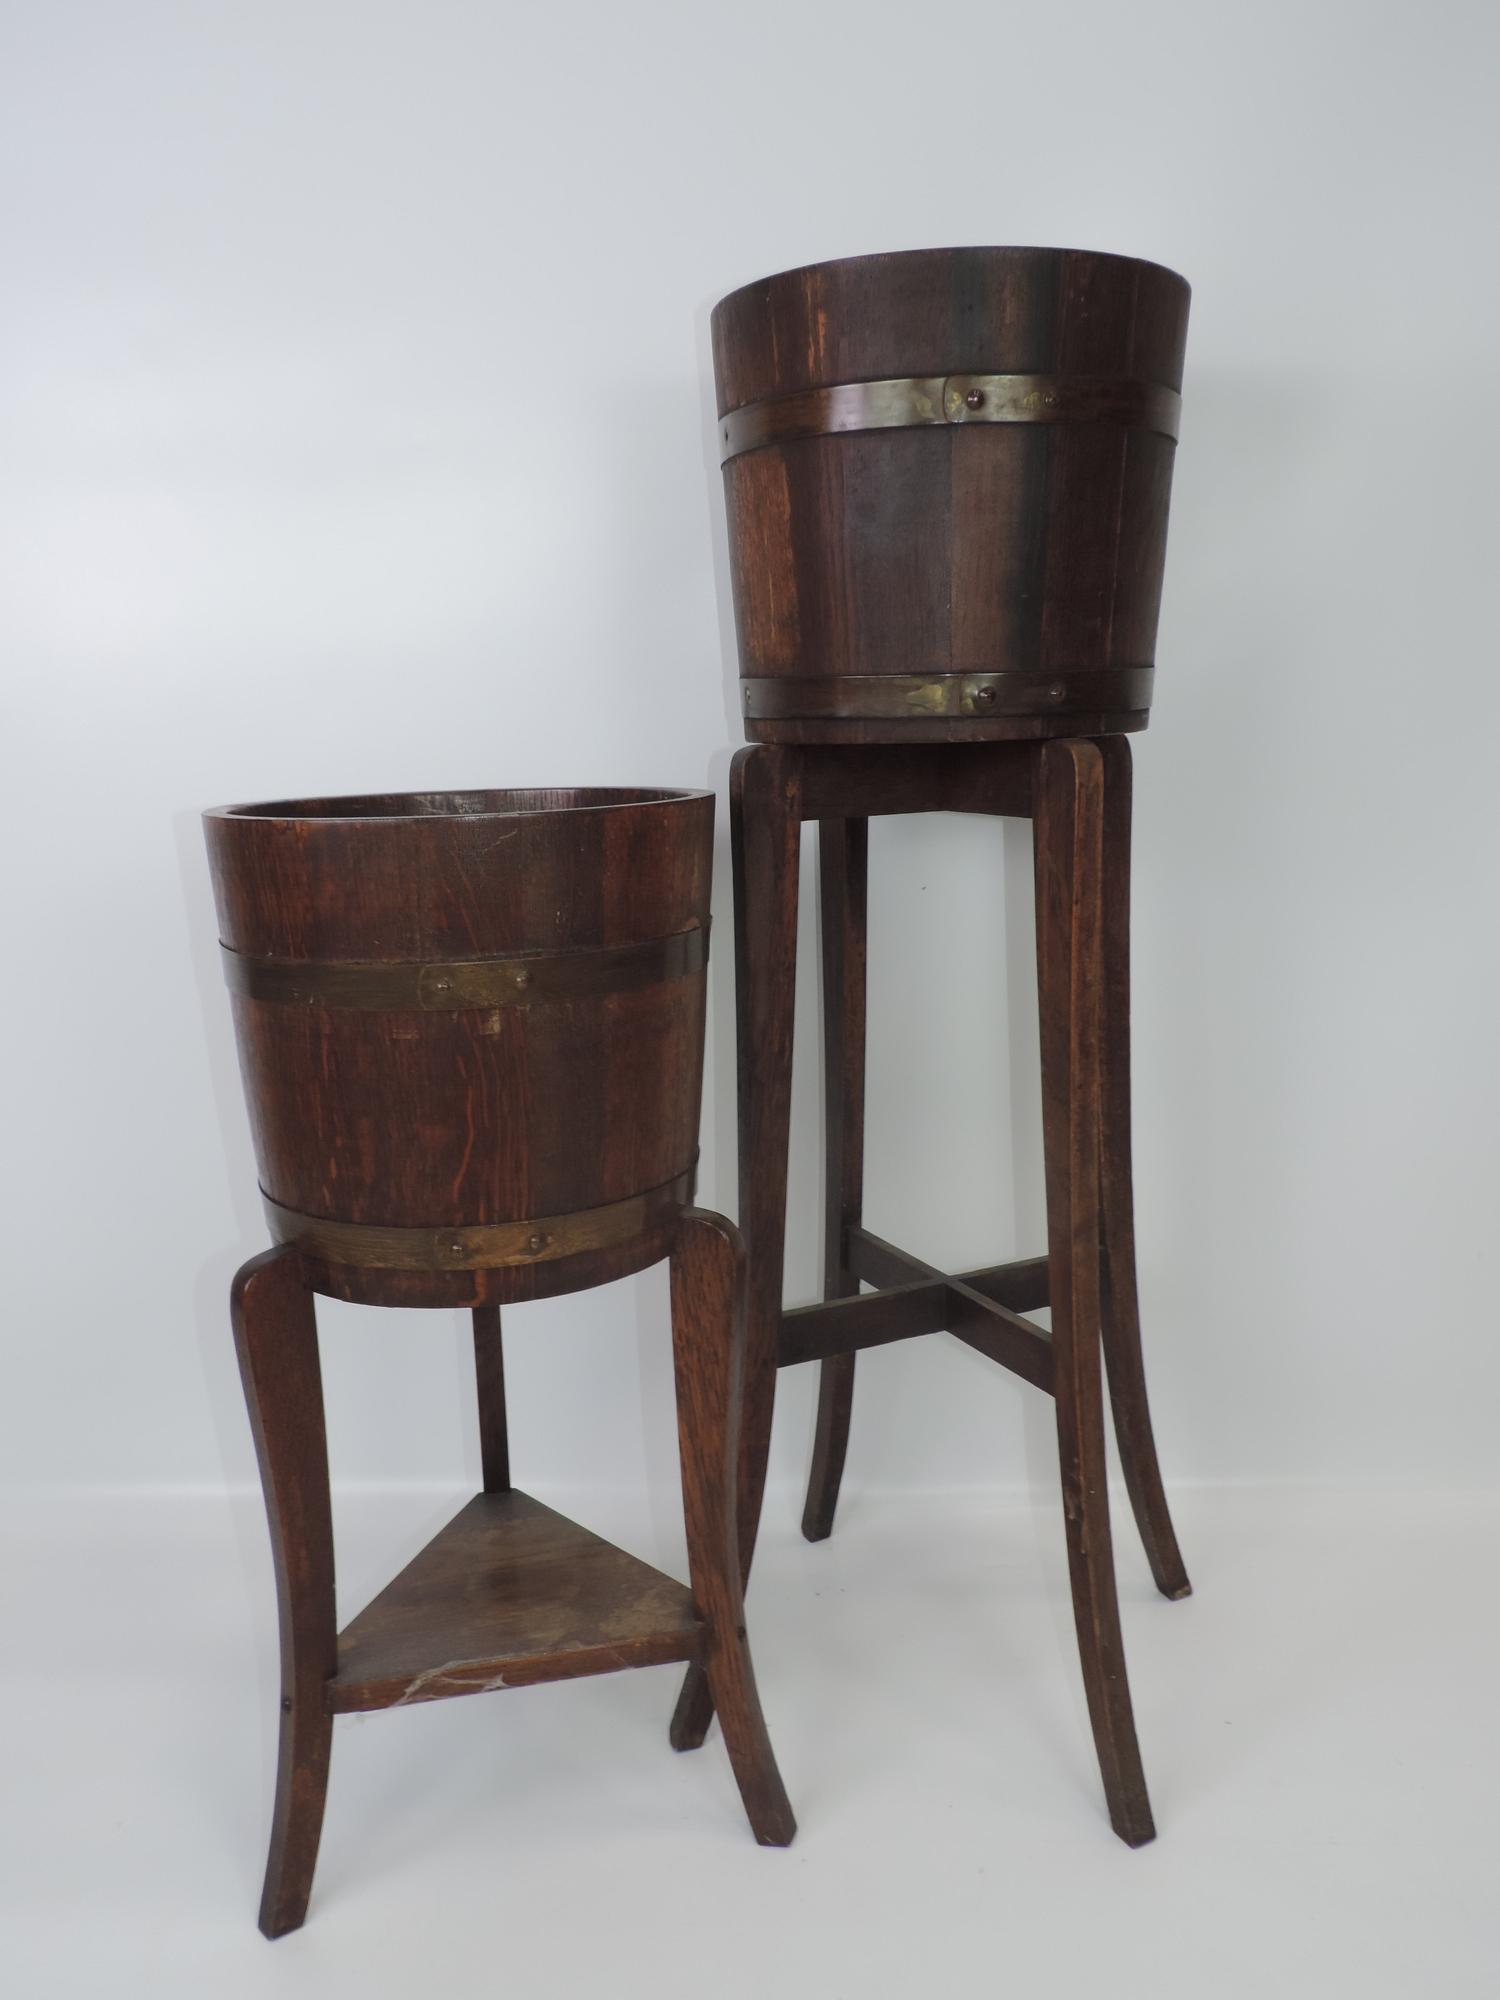 2x Coopered Wooden Planters By R A lister & Co on Stands